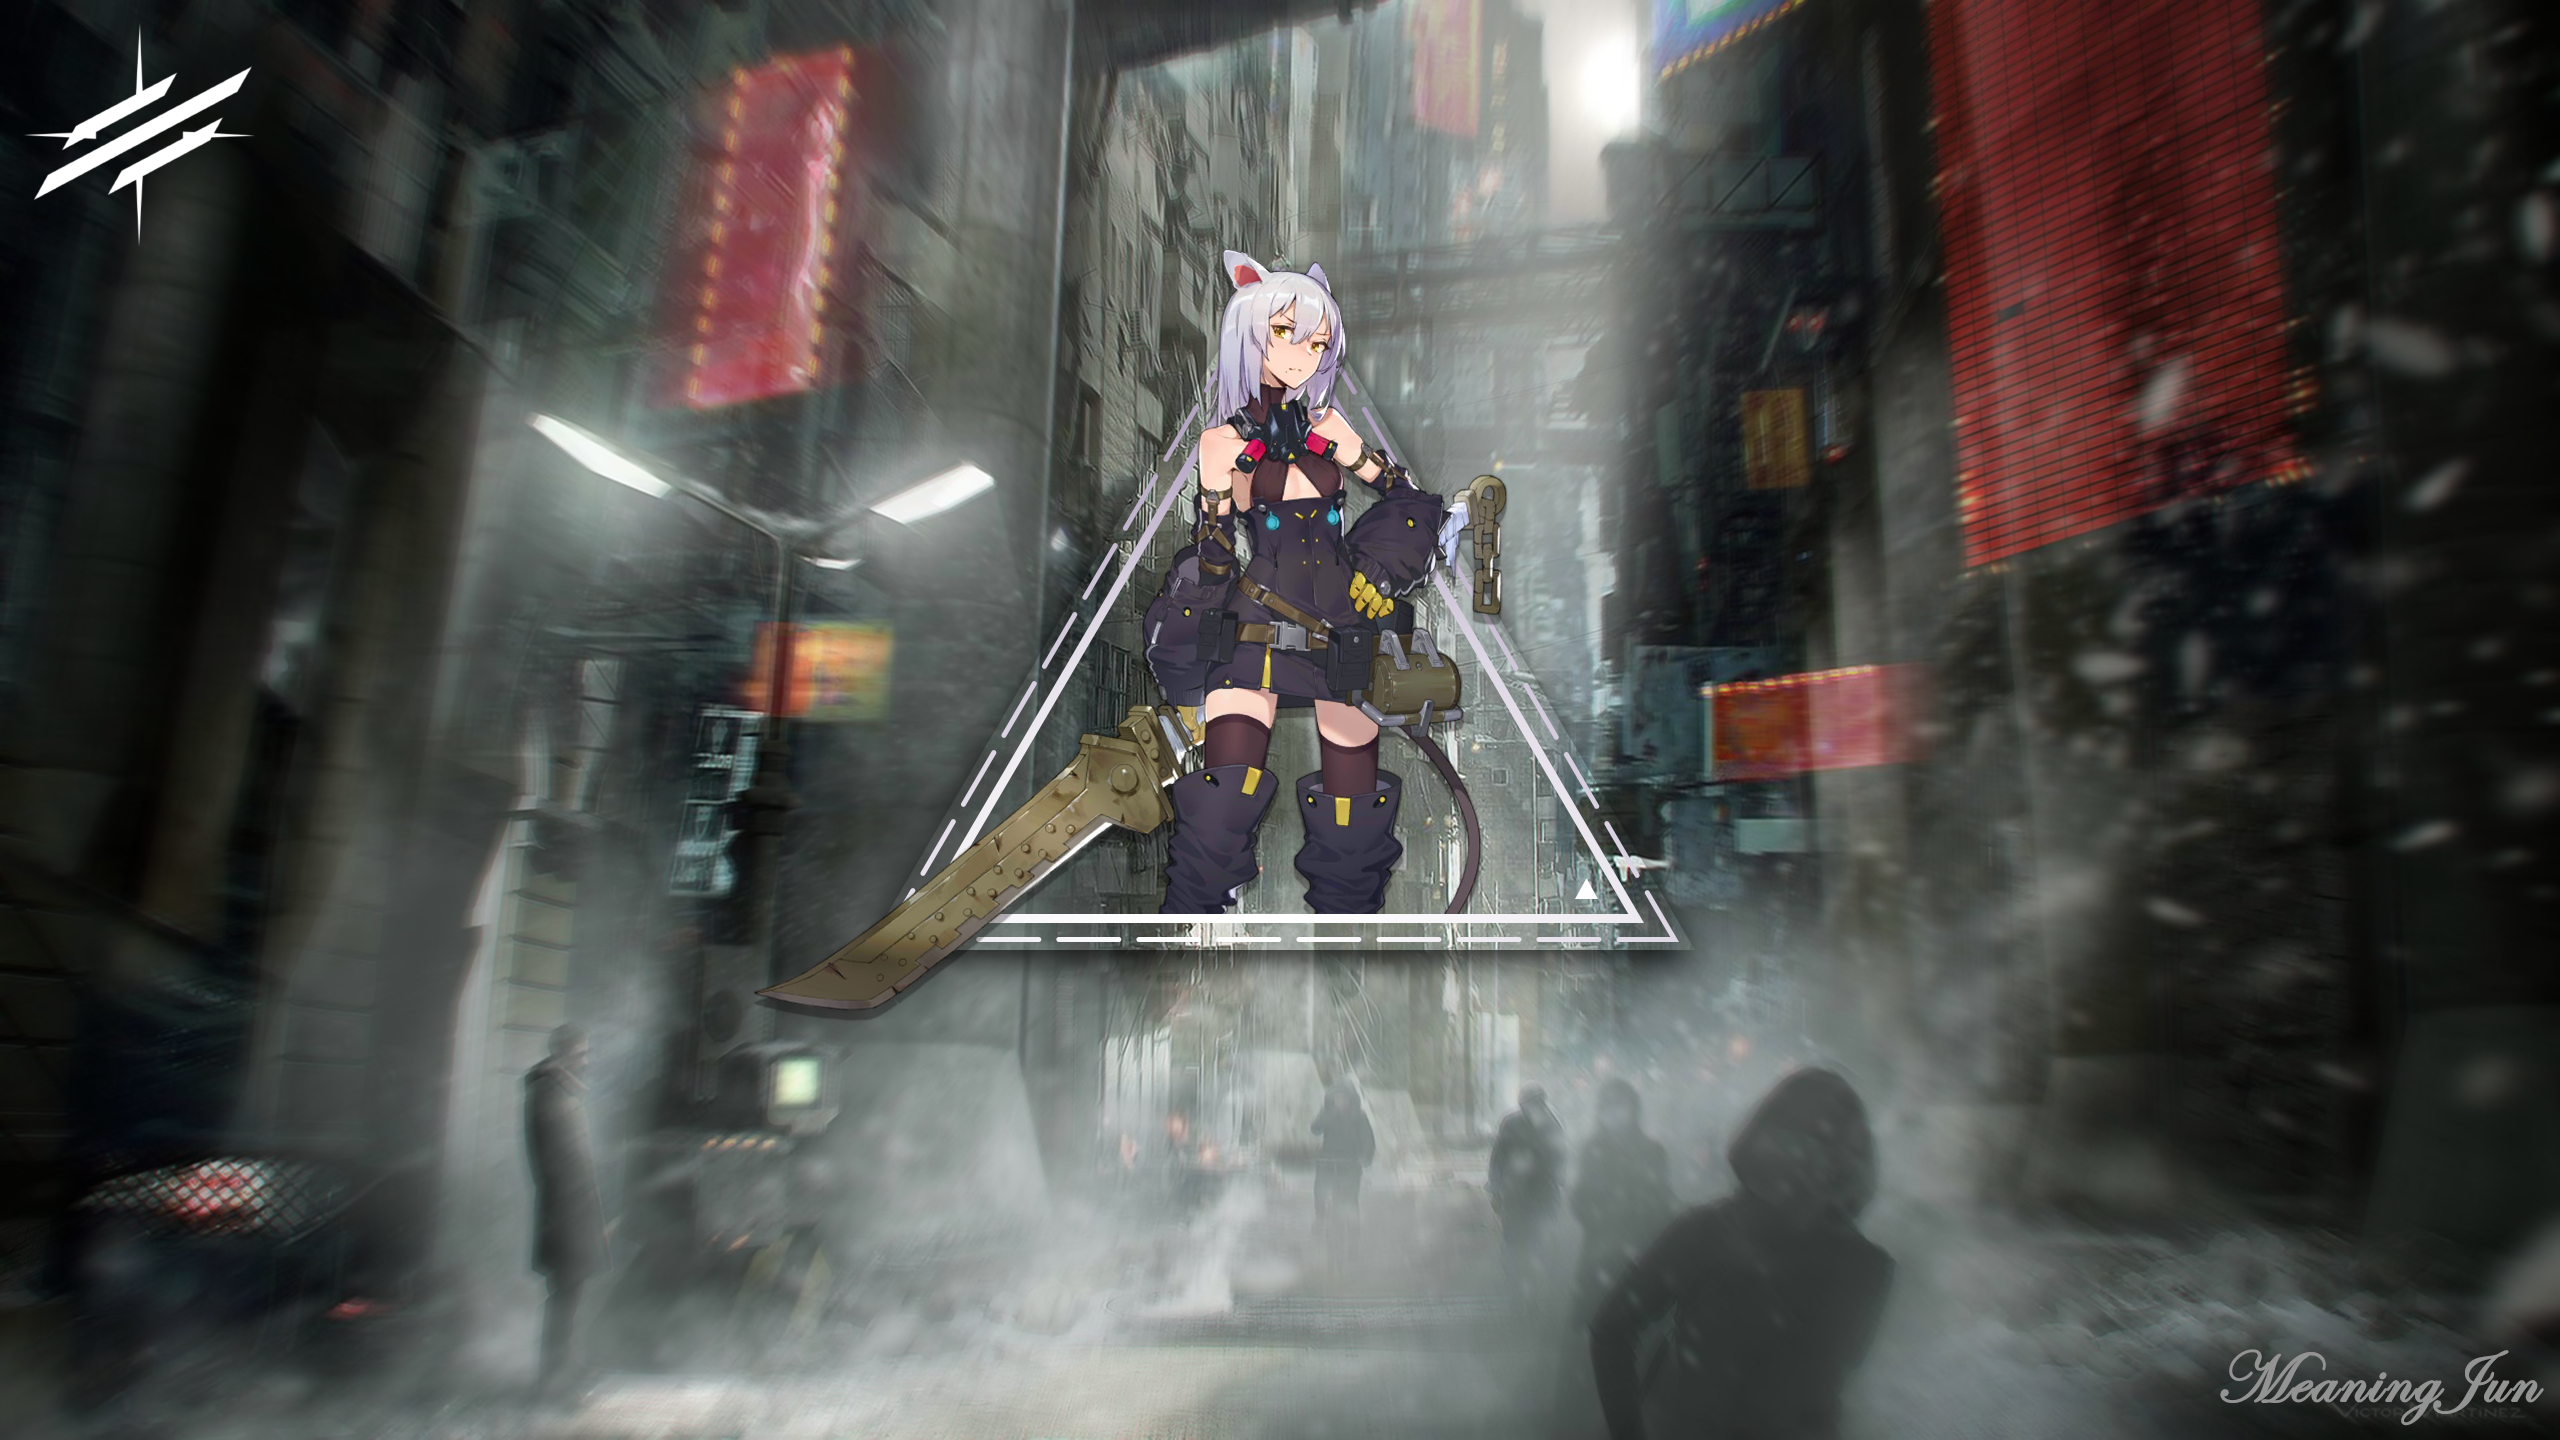 Anime 2560x1440 2D anime girls anime picture-in-picture digital art street city futuristic city fantasy art Arknights Scavenger (Arknights) cat ears thigh-highs female warrior soldier white hair